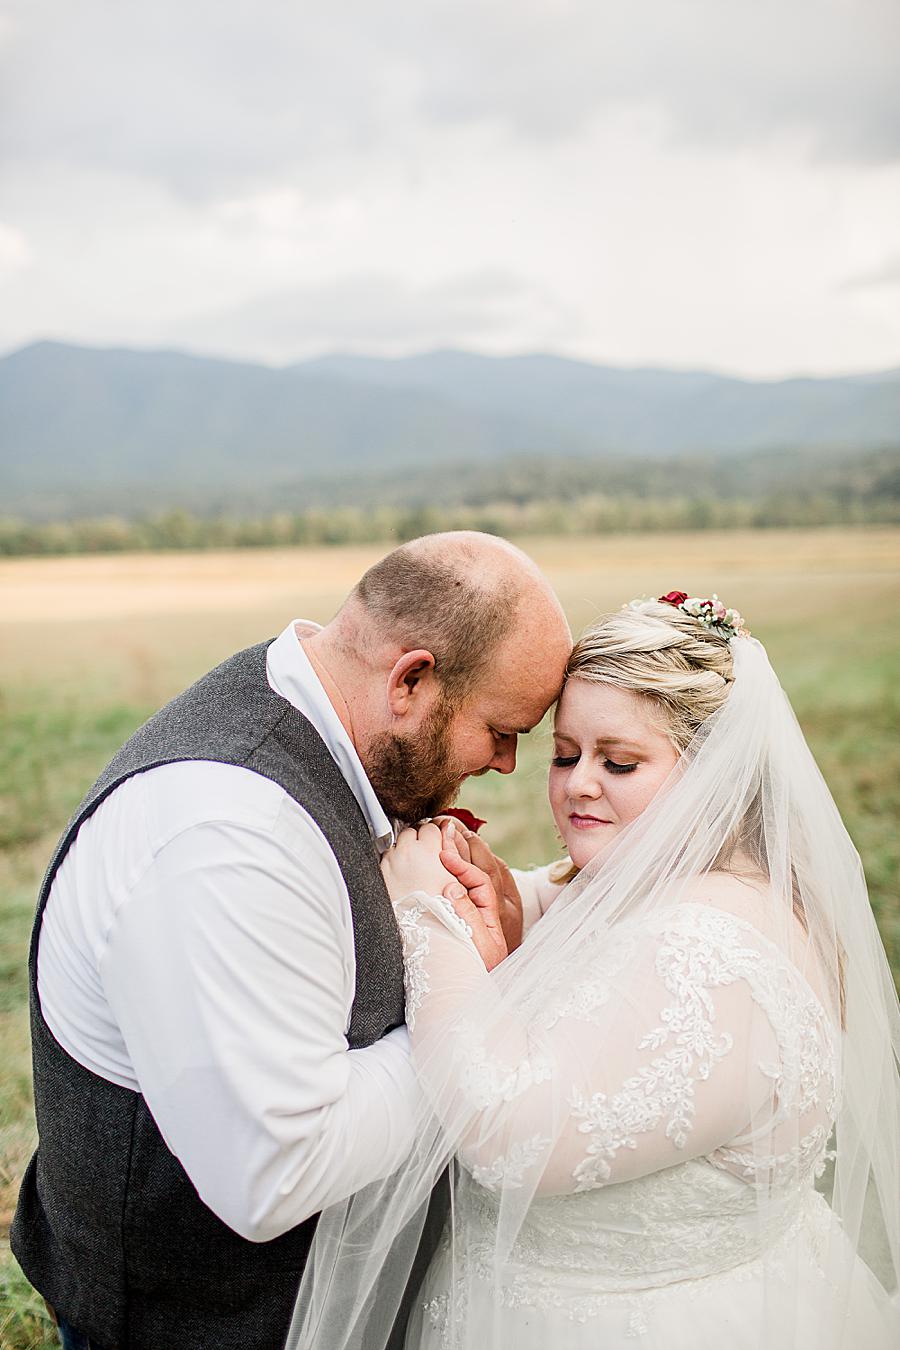 Husband and wife by Knoxville Wedding Photographer, Amanda May Photos.